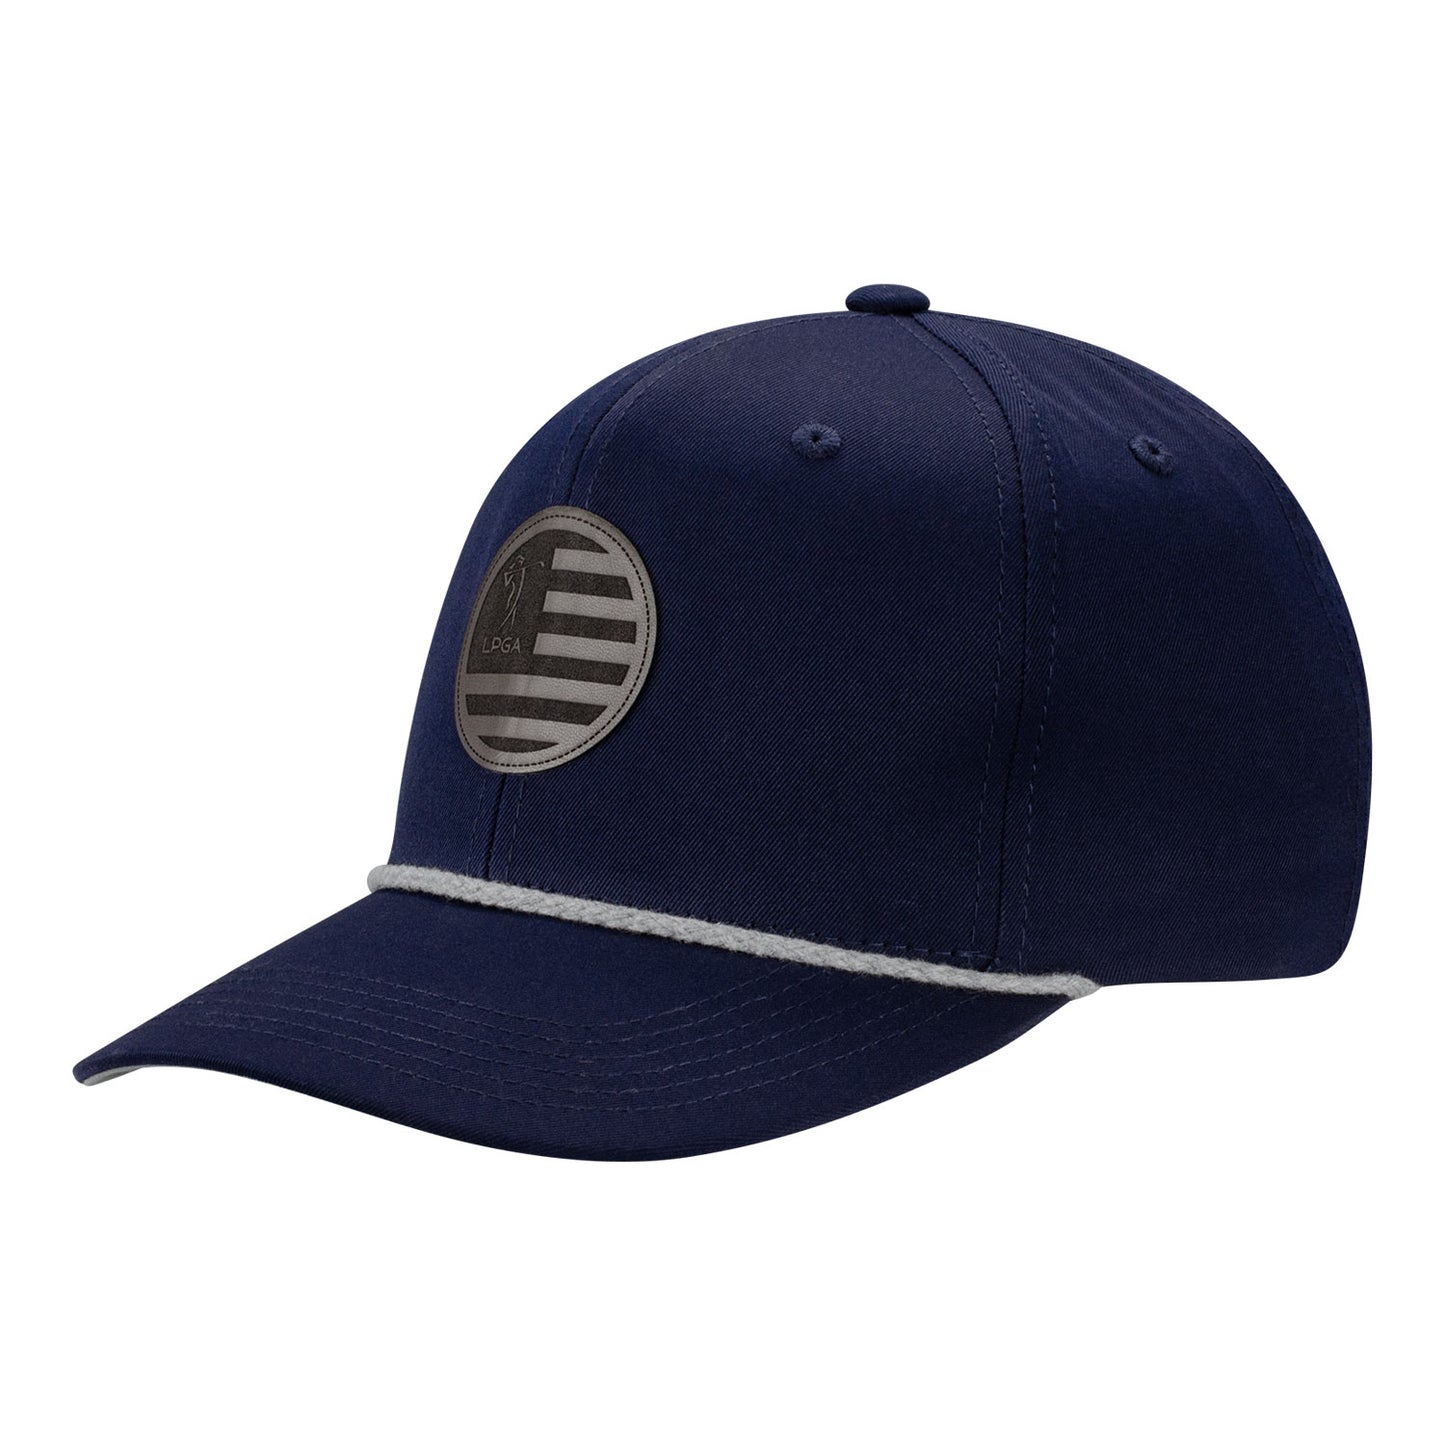 Imperial LPGA Men's Rope Hat with Suede Patch in Dark Blue - Angled Left Side View